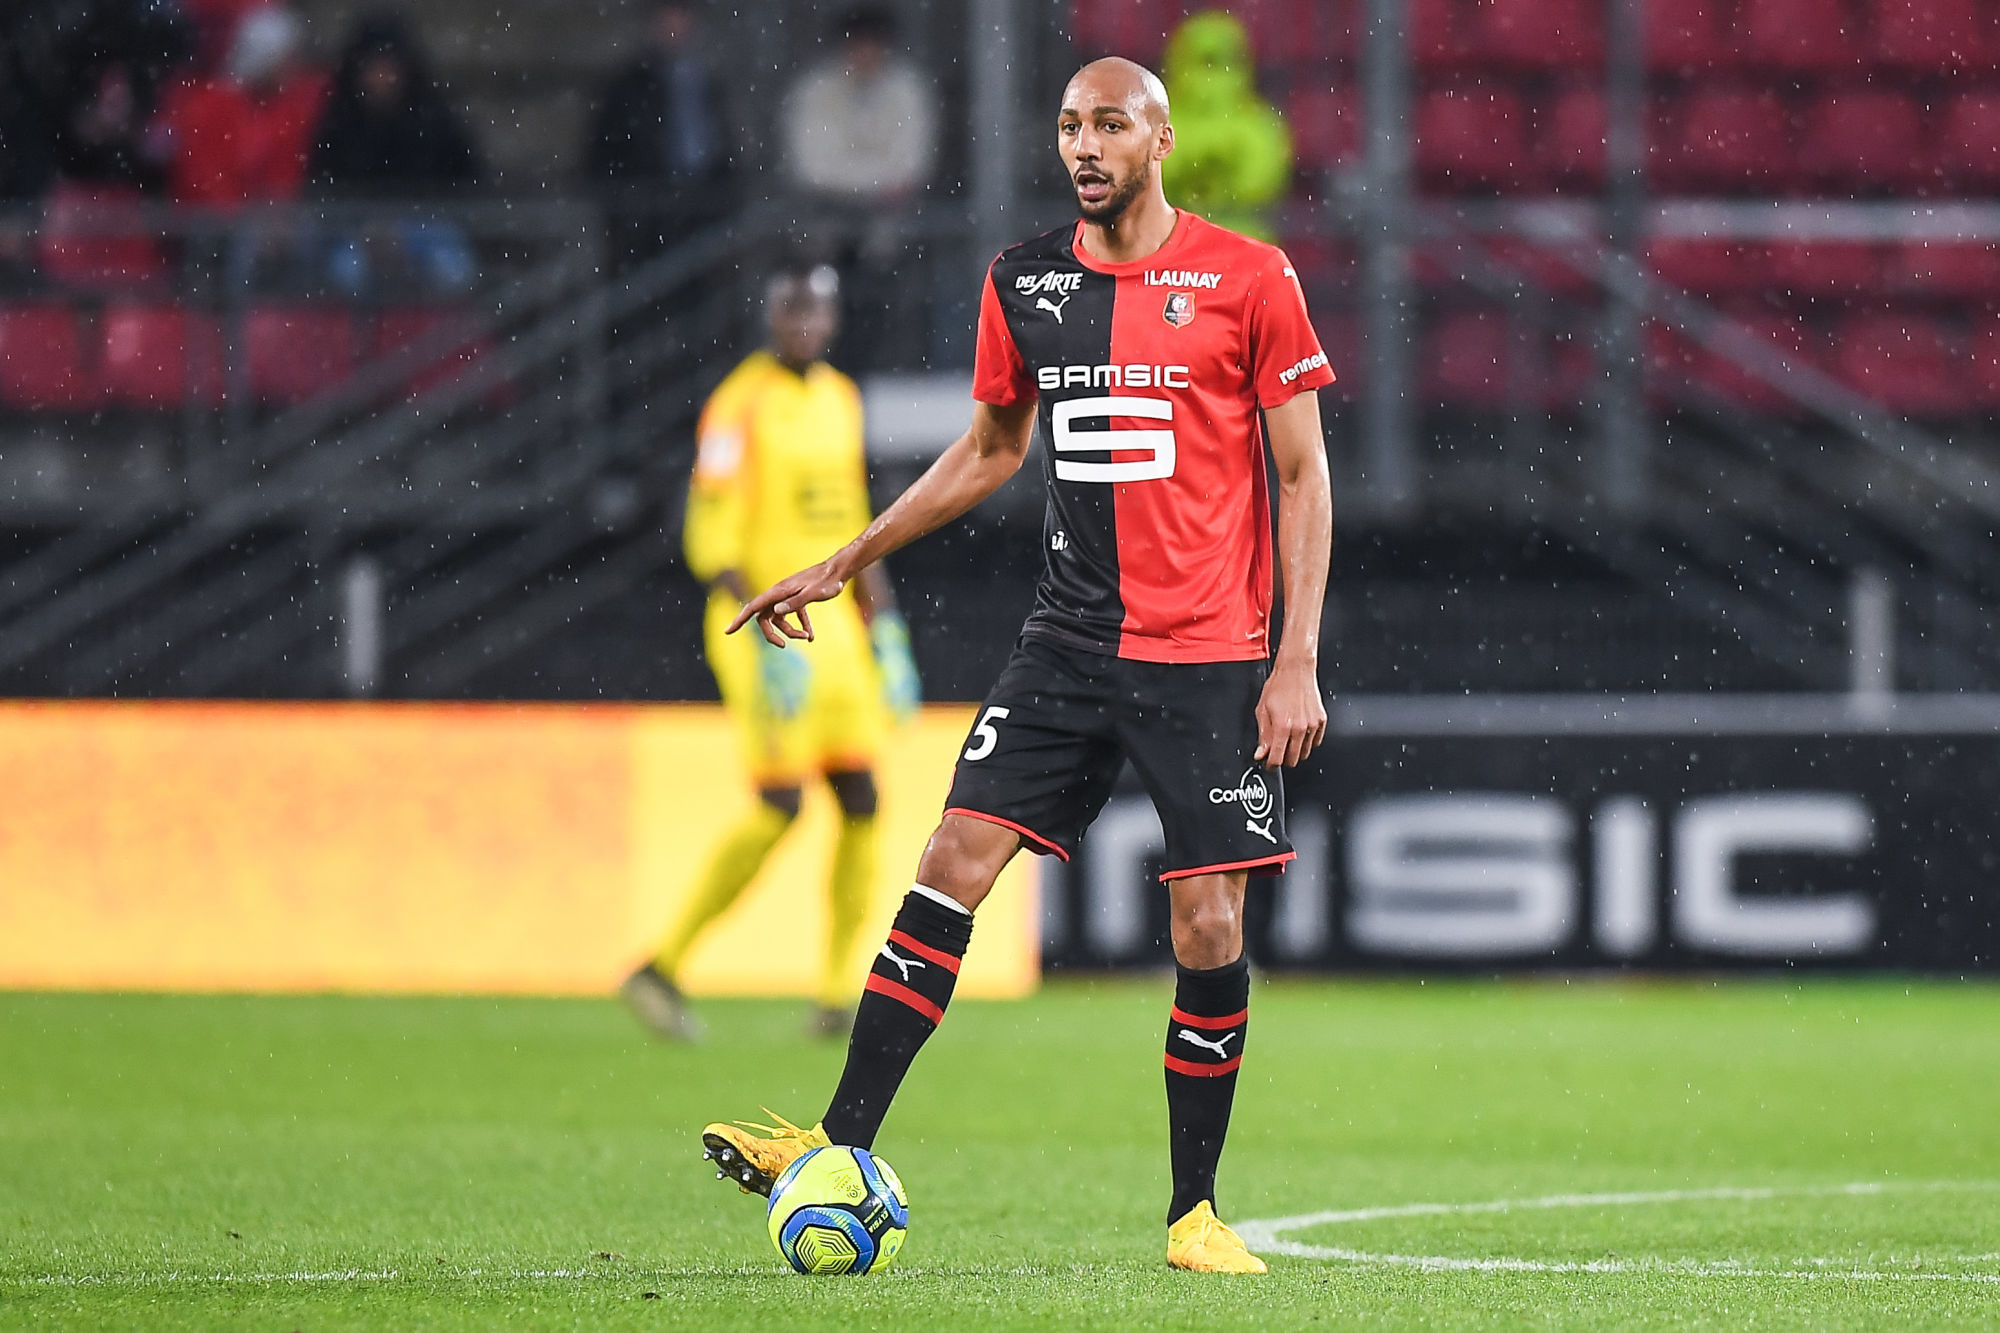 Steven NZONZI of Rennes during the French Ligue 1 Soccer match between Rennes and Montpellier at Roazhon Park on March 8, 2020 in Rennes, France. (Photo by Baptiste Fernandez/Icon Sport) - Steven NZONZI - Roazhon Park - Rennes (France)